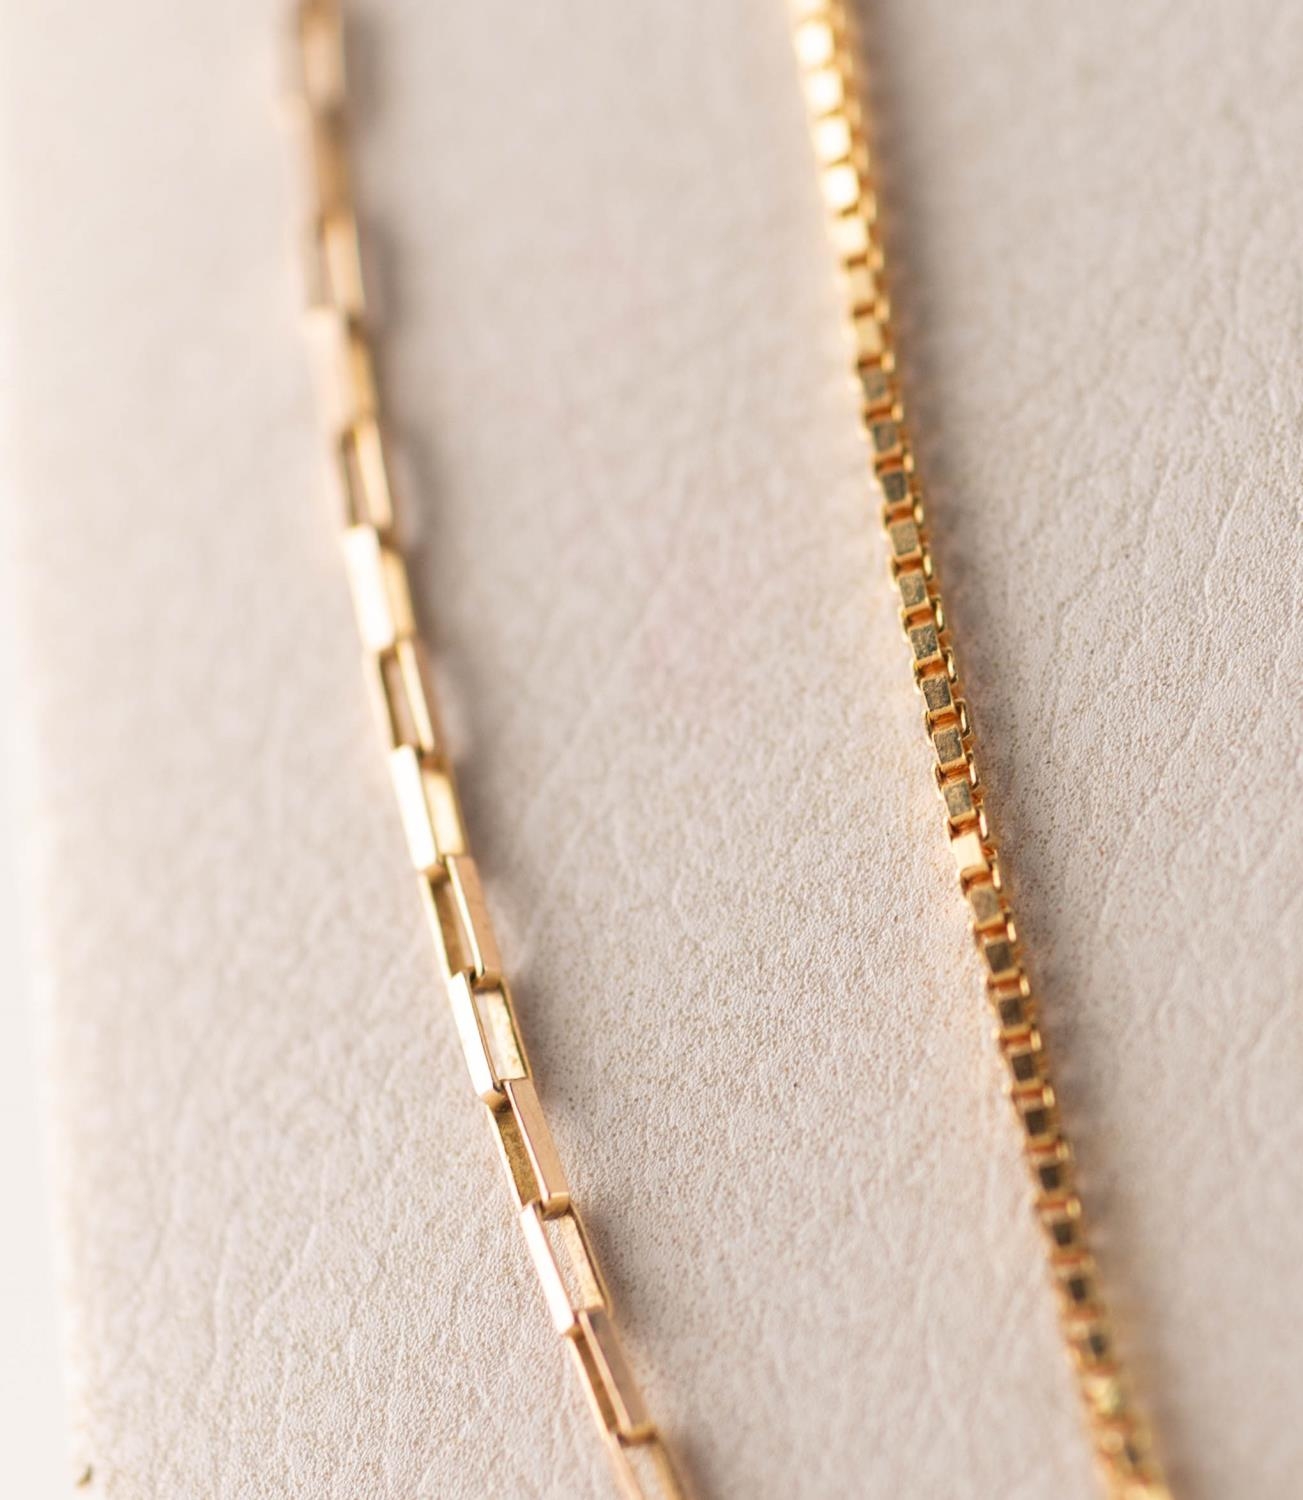 9ct GOLD FINE CHAIN NECKLACE with oblong links and ring clasp, 16 1/2in (42cm) long and a 9ct GOLD - Image 2 of 2